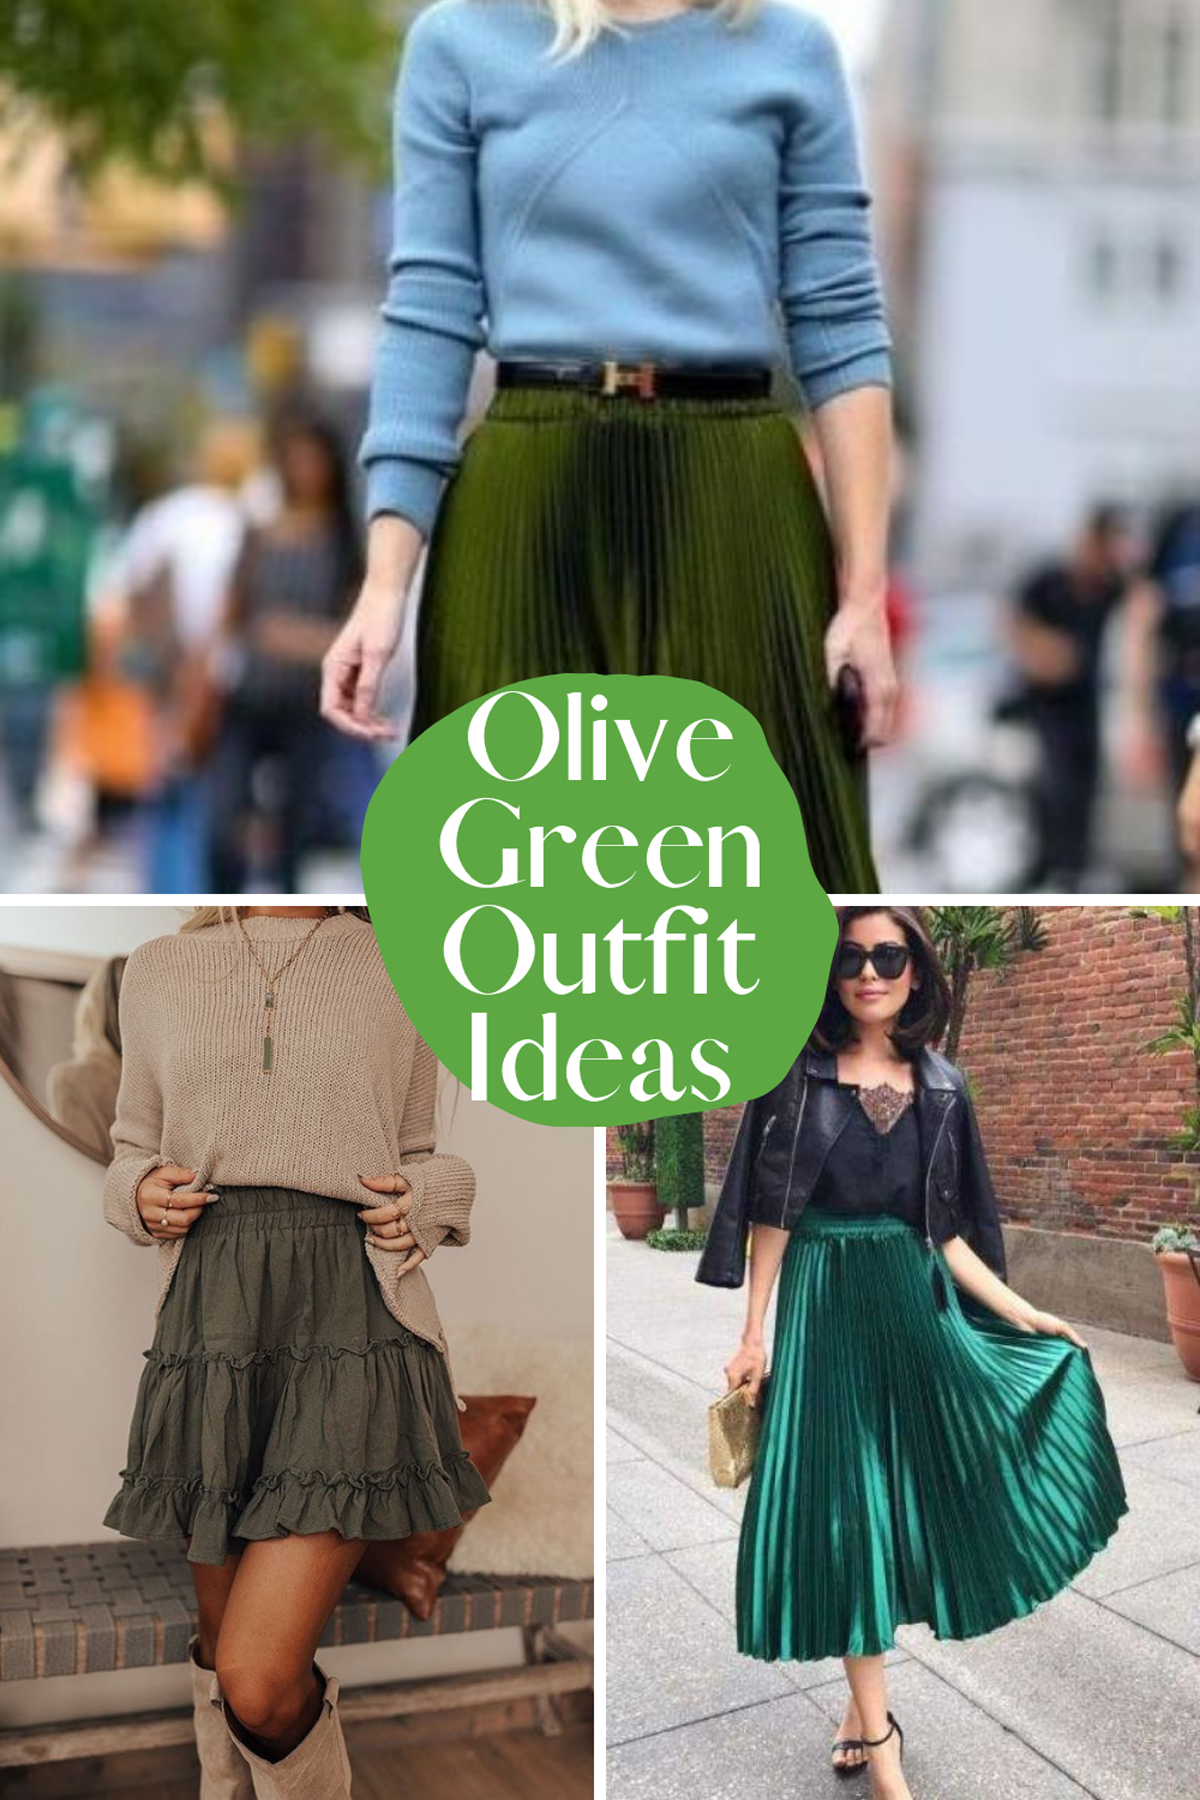 Olive Green Outfit Ideas